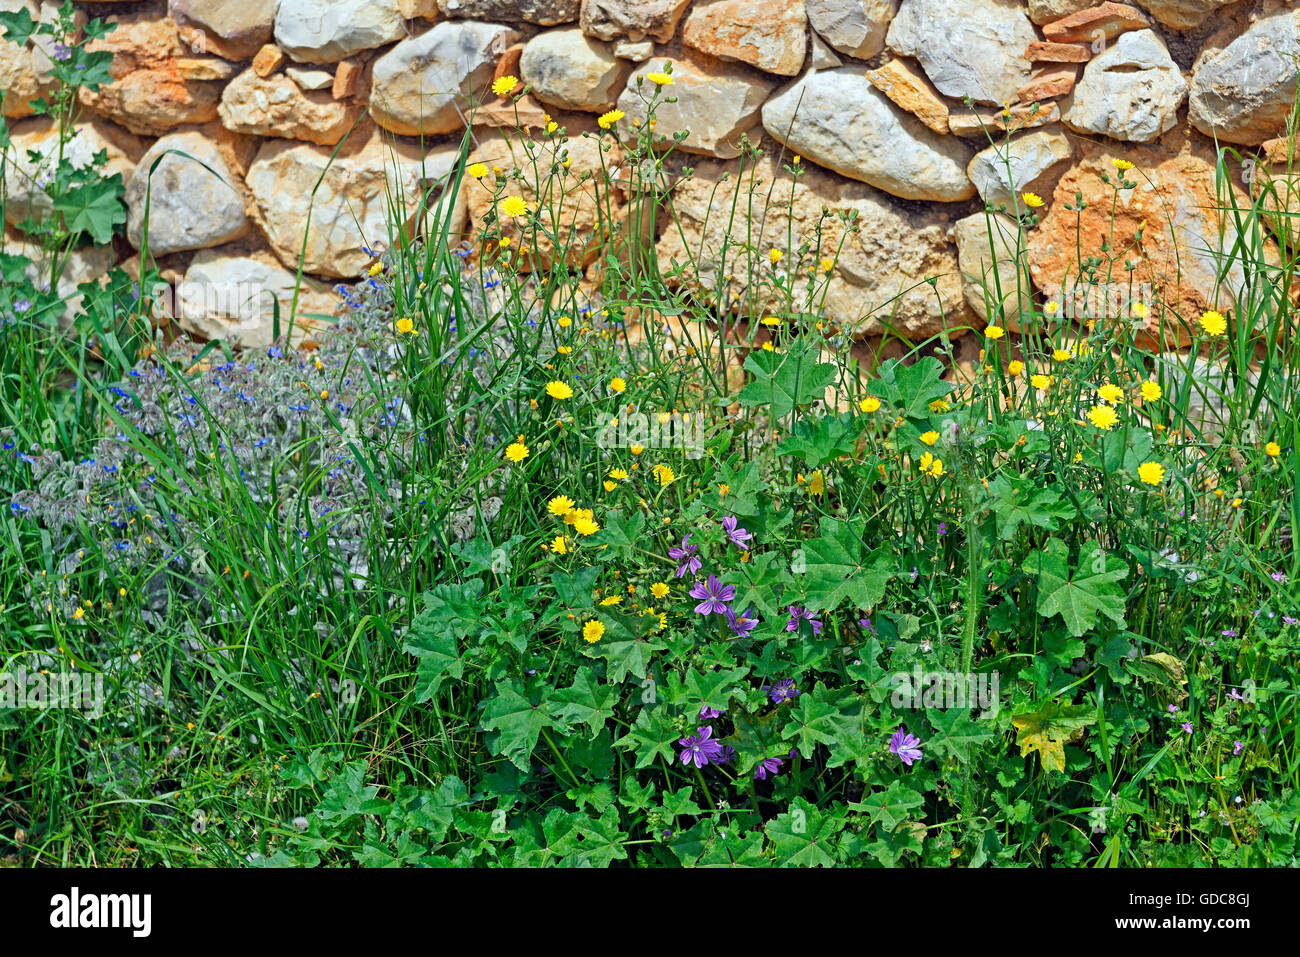 More poorly,natural stone,wild flowers,blossoms, Stock Photo